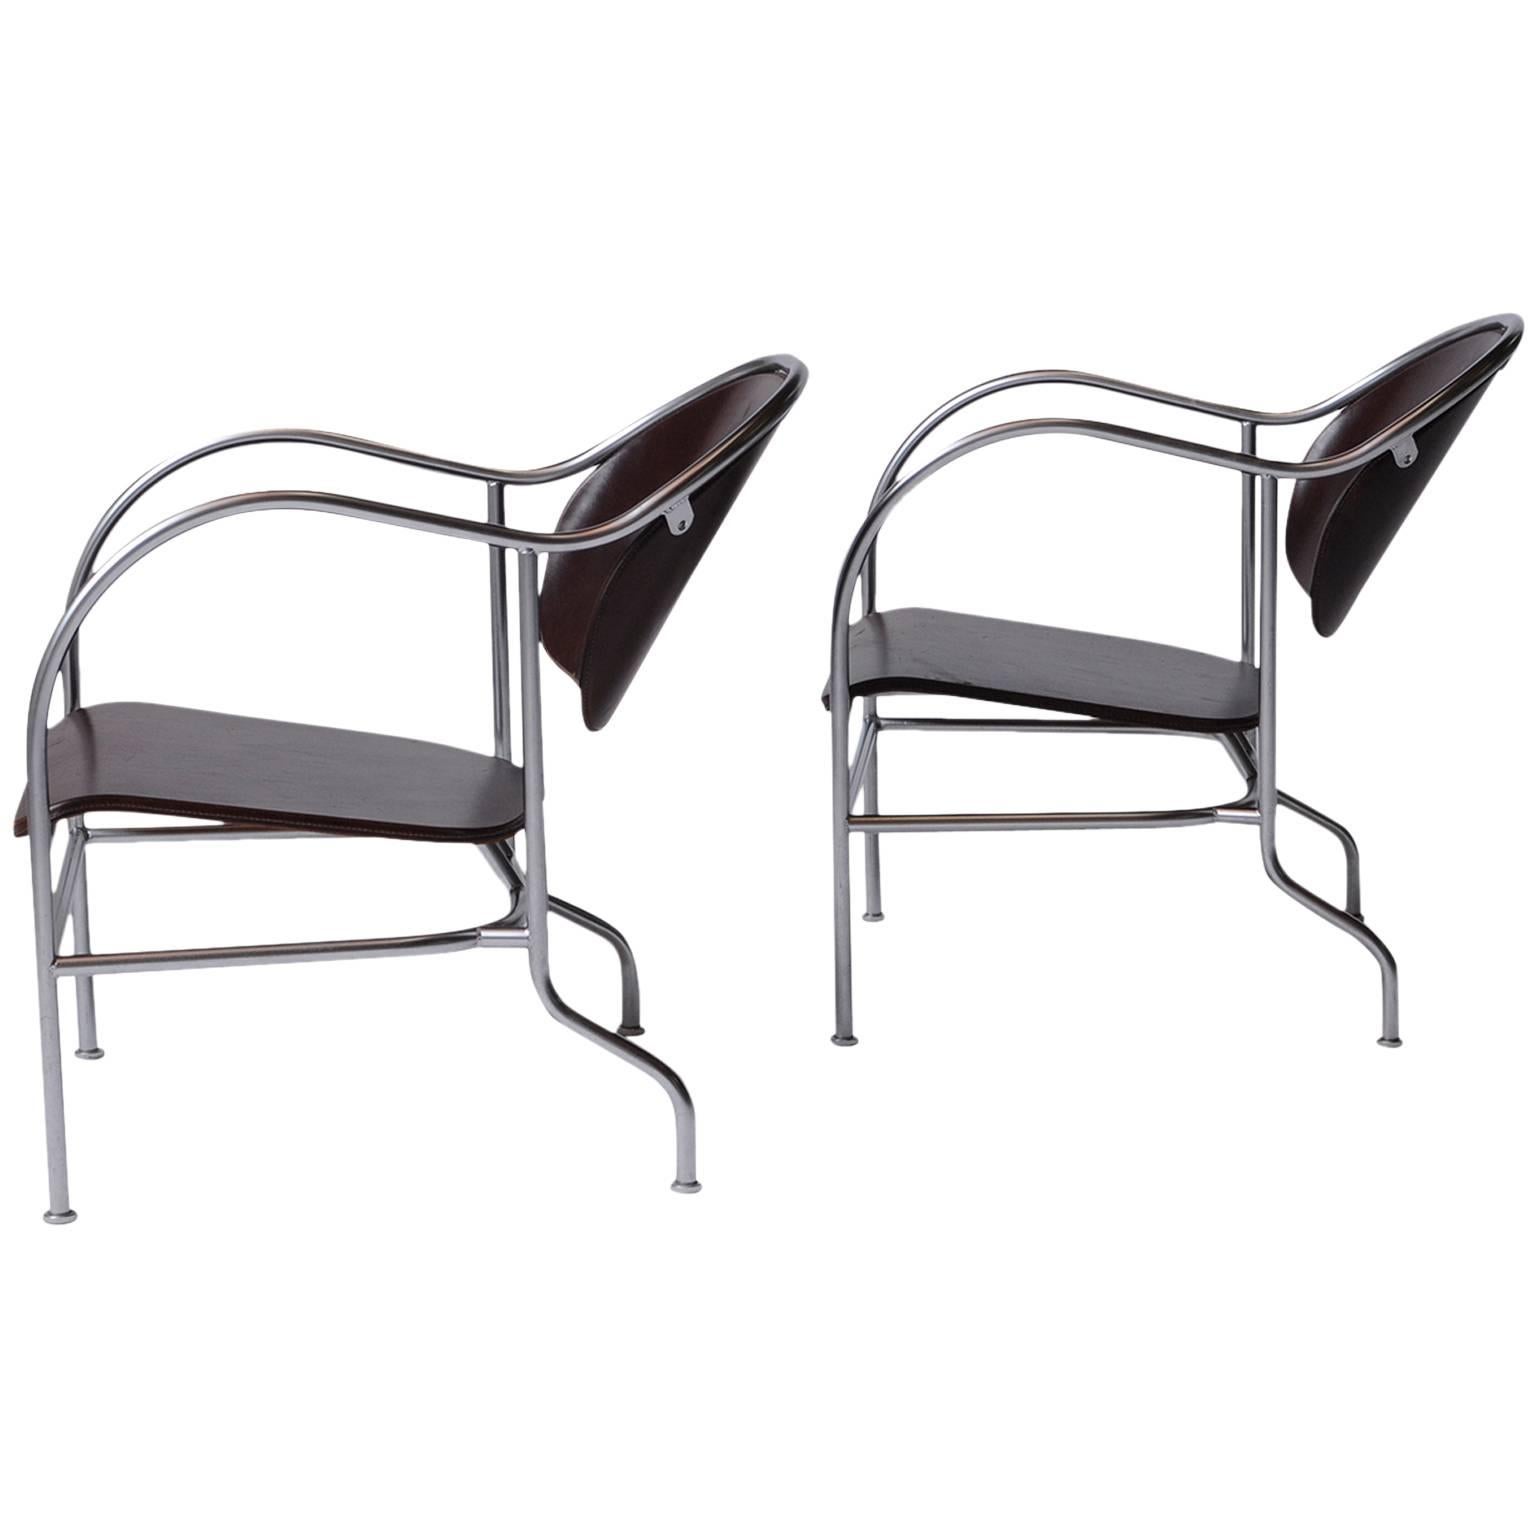 Pair of "Sven" Easy Chairs by Mats Theselius